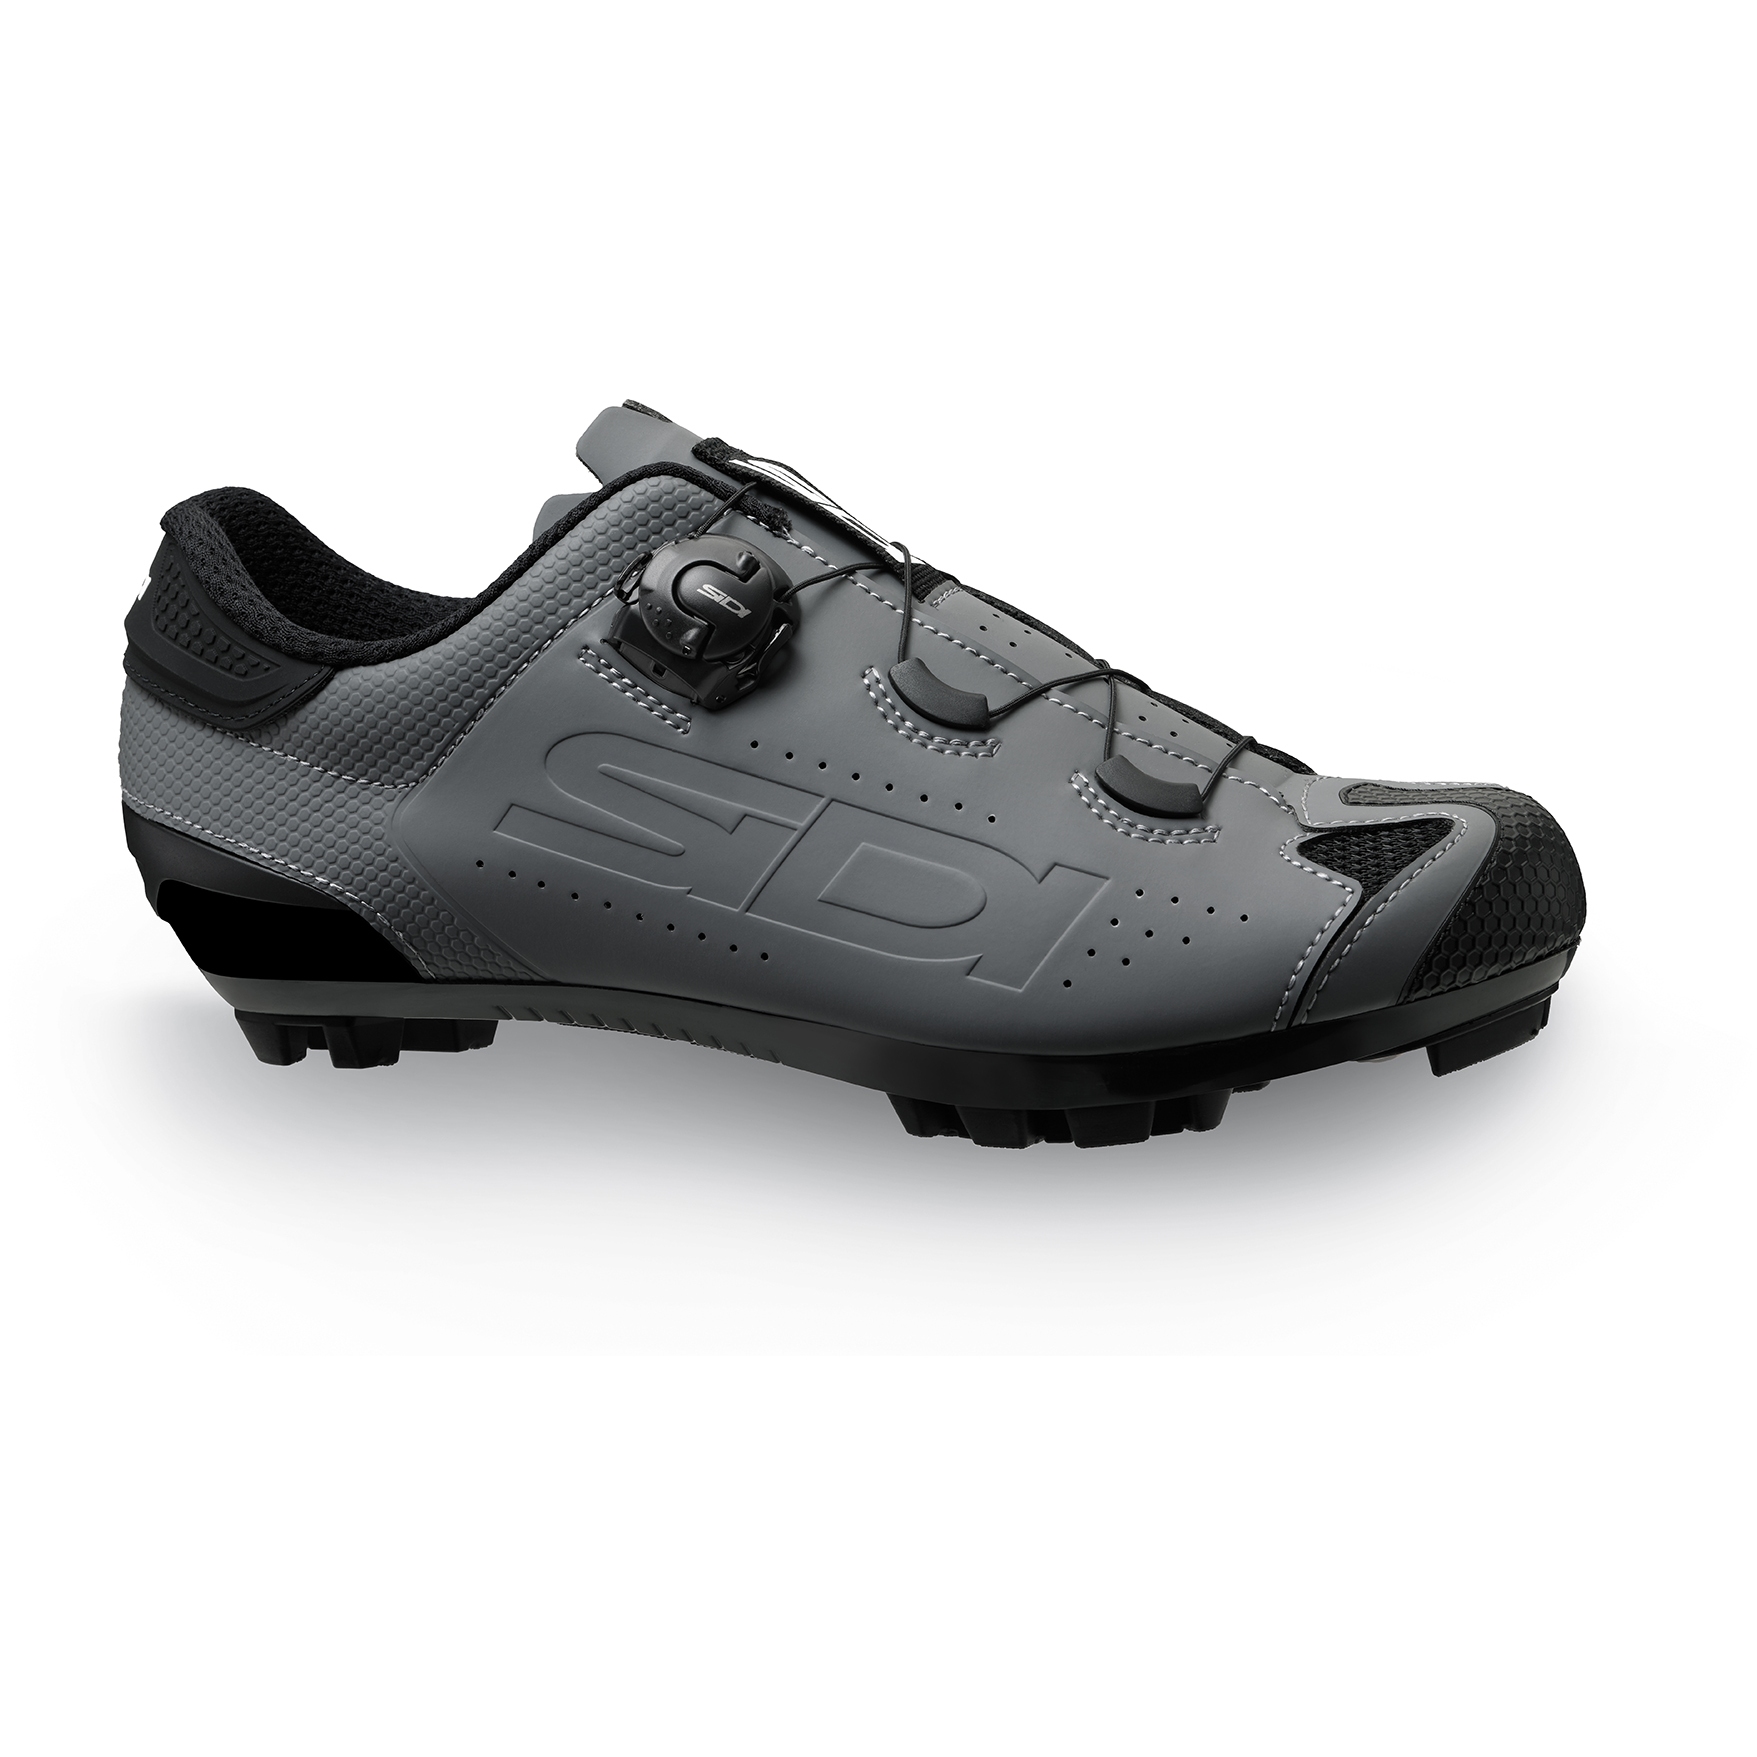 Picture of Sidi MTB Dust Gravel Shoes - Grey